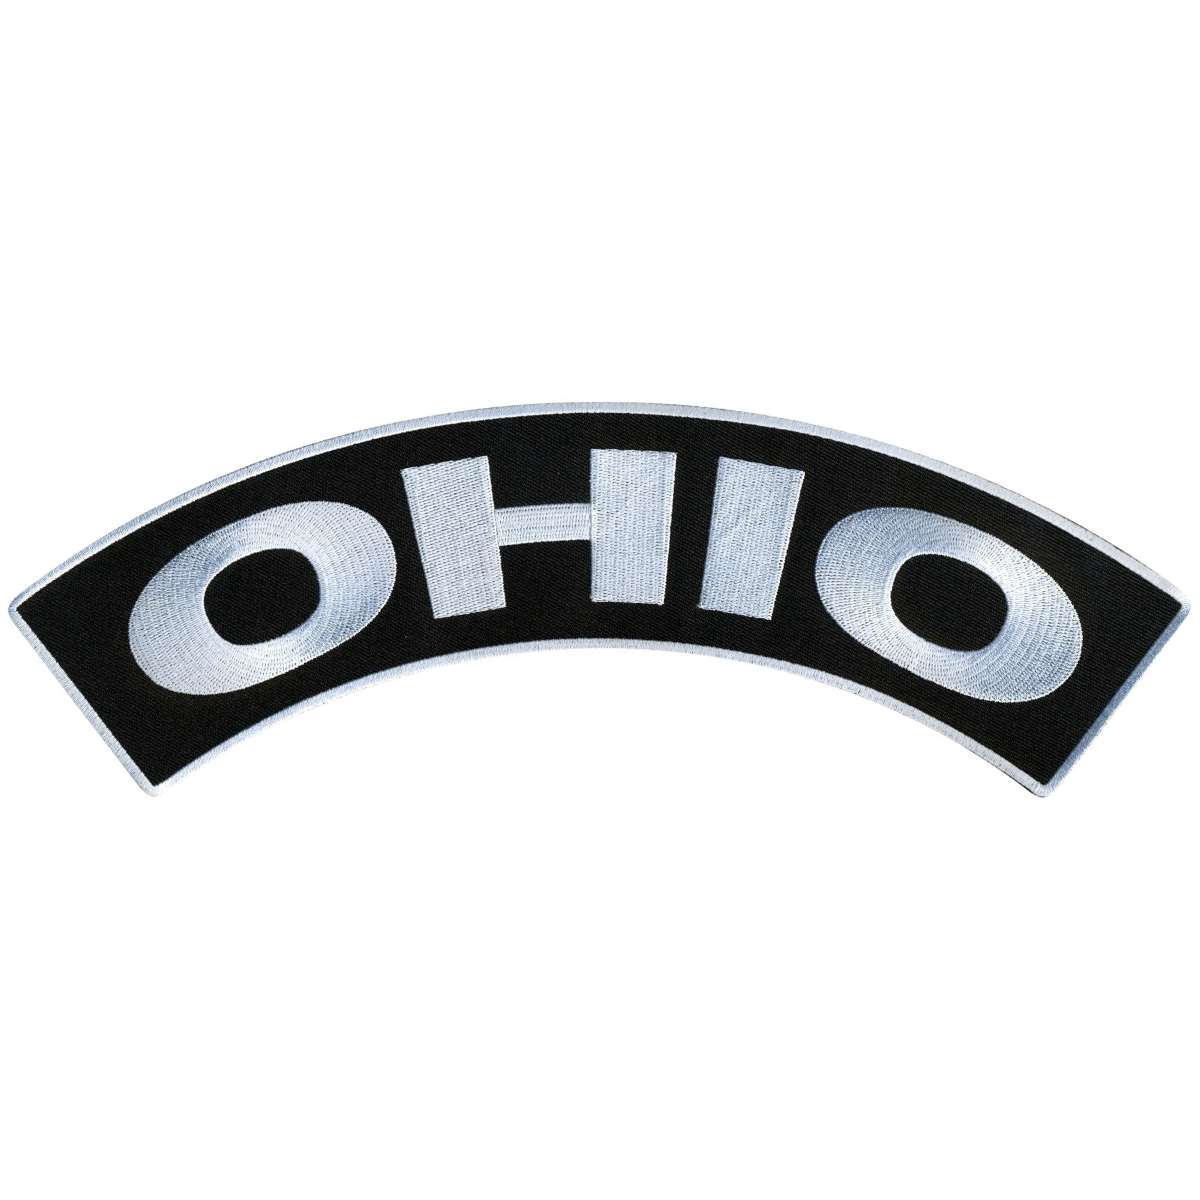 Hot Leathers Ohio 12” X 3” Top Rocker Patch PPM4069